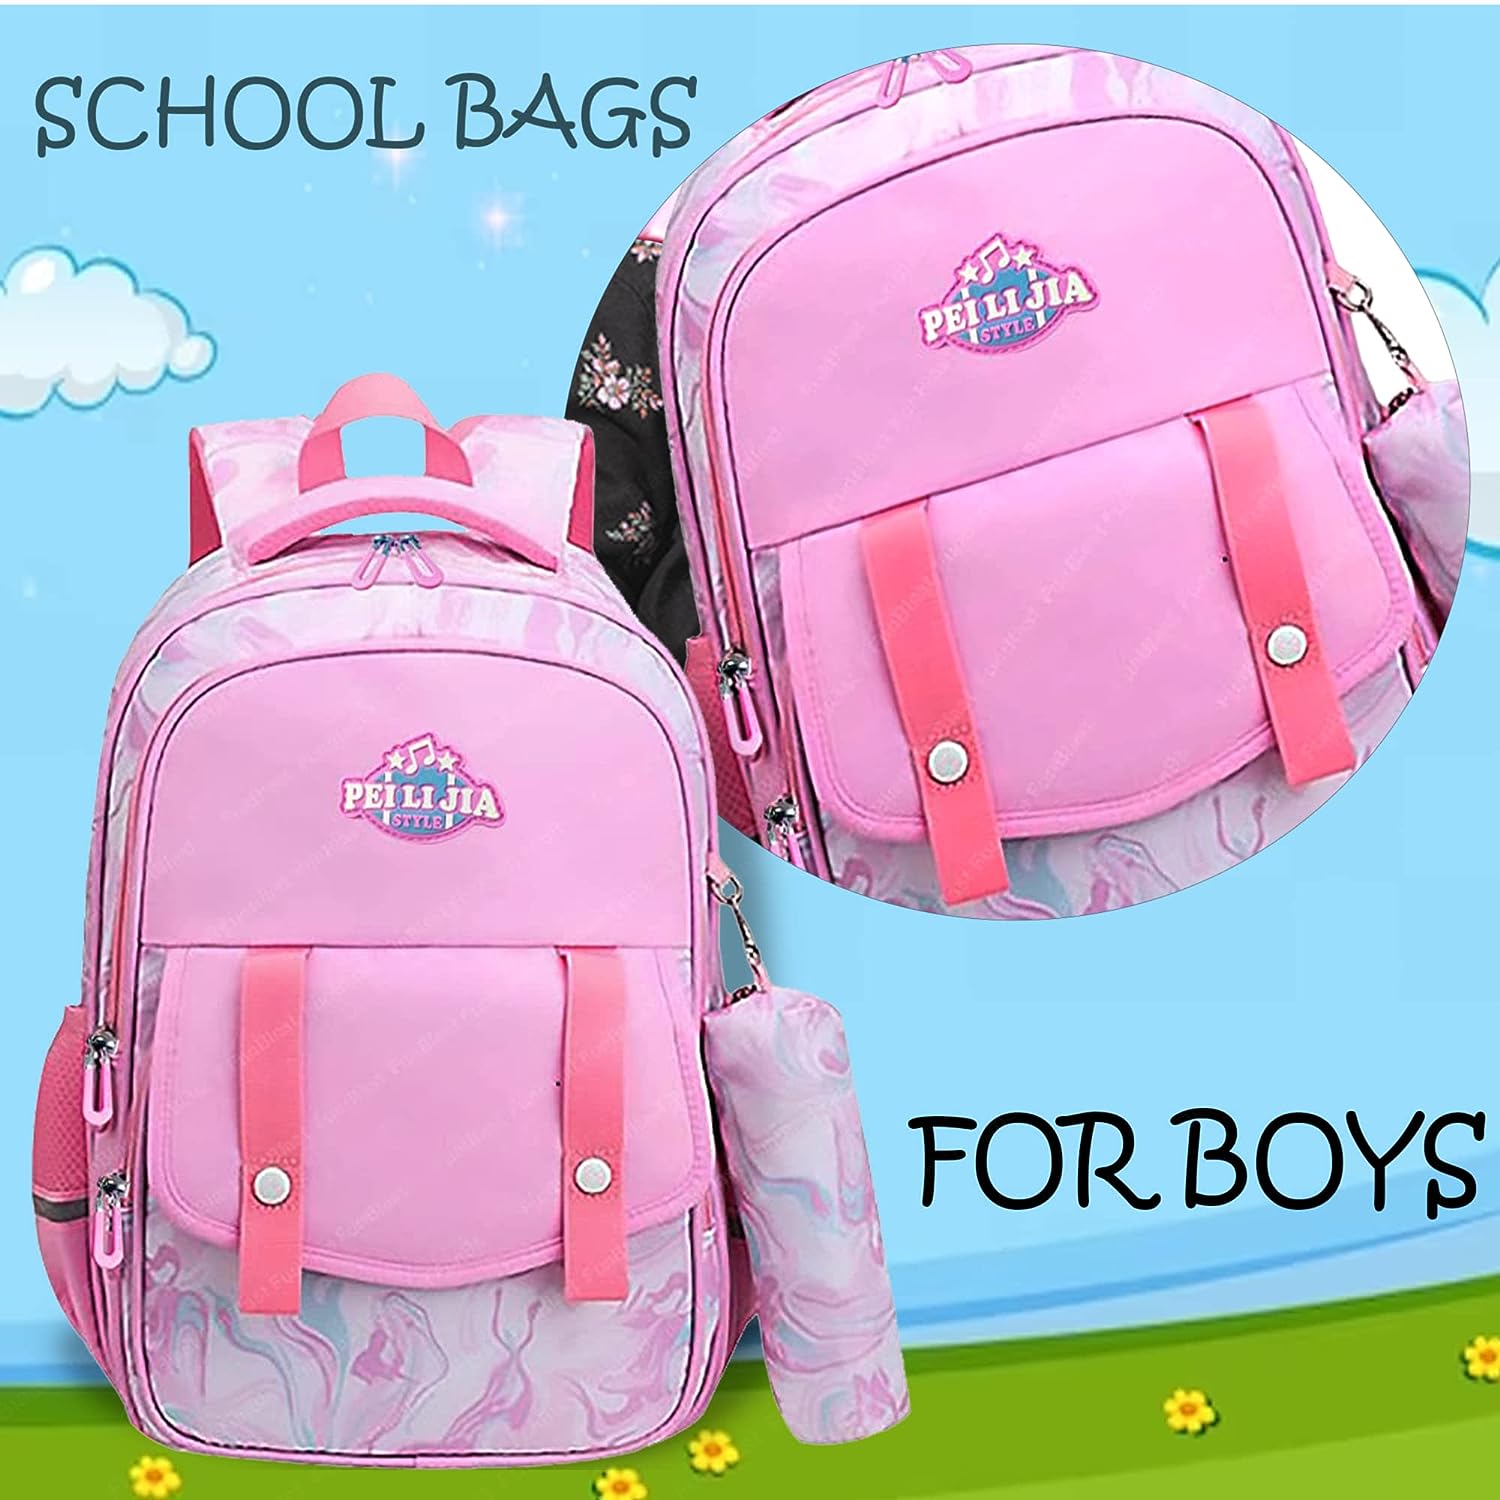 School Bags for Boys – College Bag, Casual Bag, School Bag with Pencil –  FunBlast